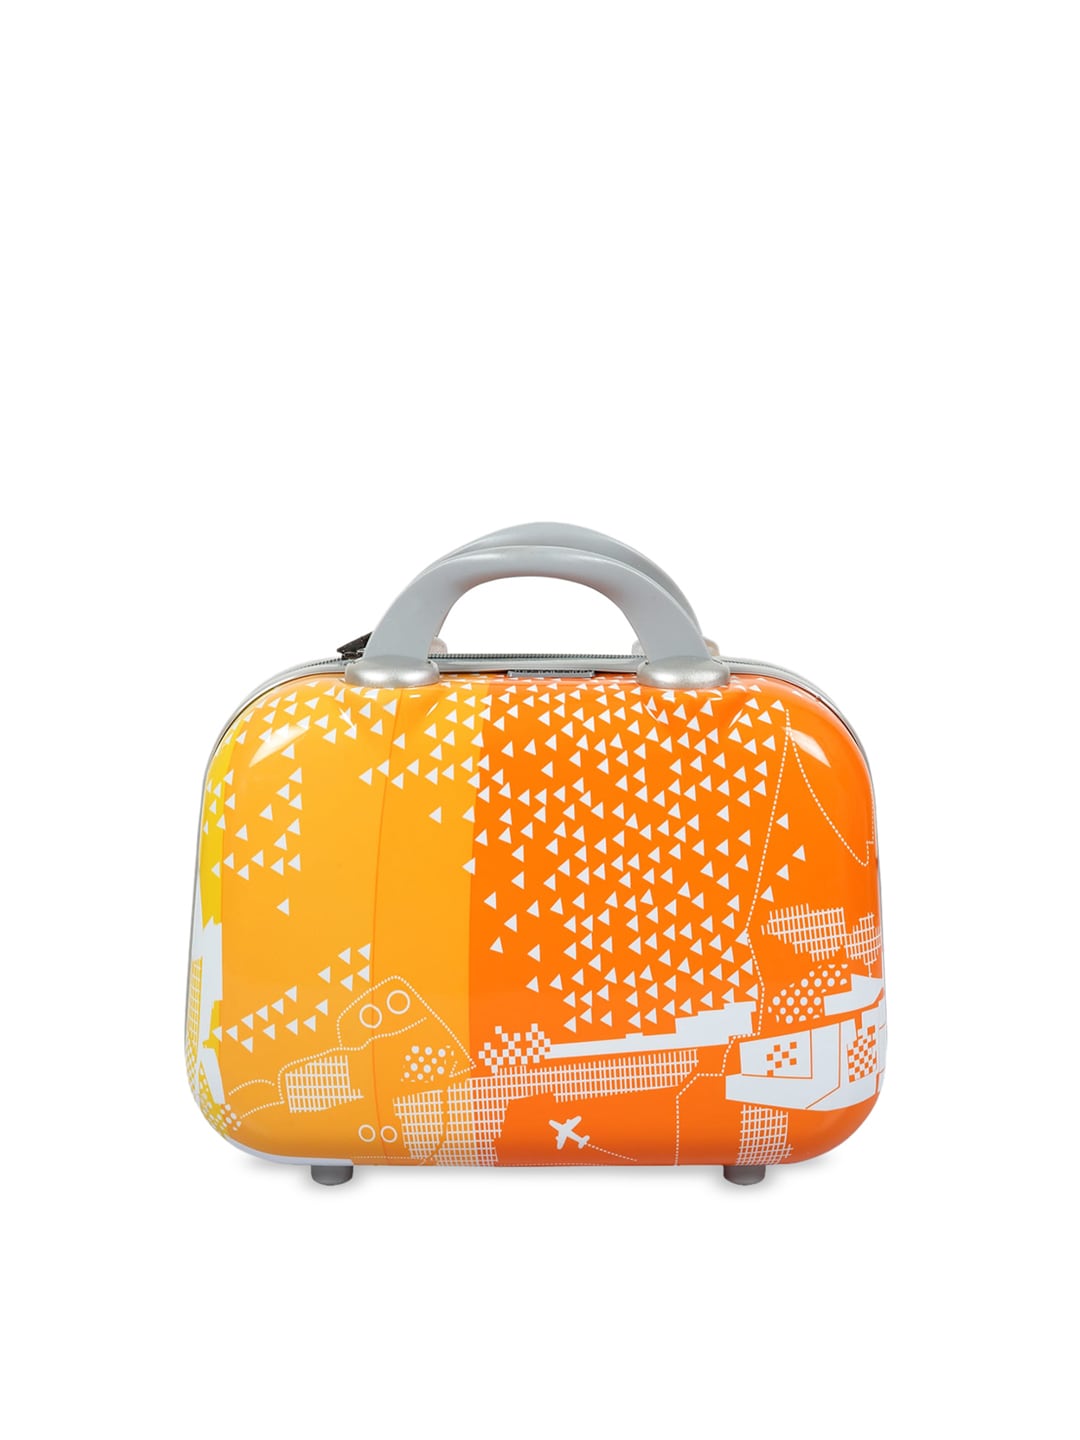 Polo Class Orange Printed Small Travel Vanity Bag Price in India